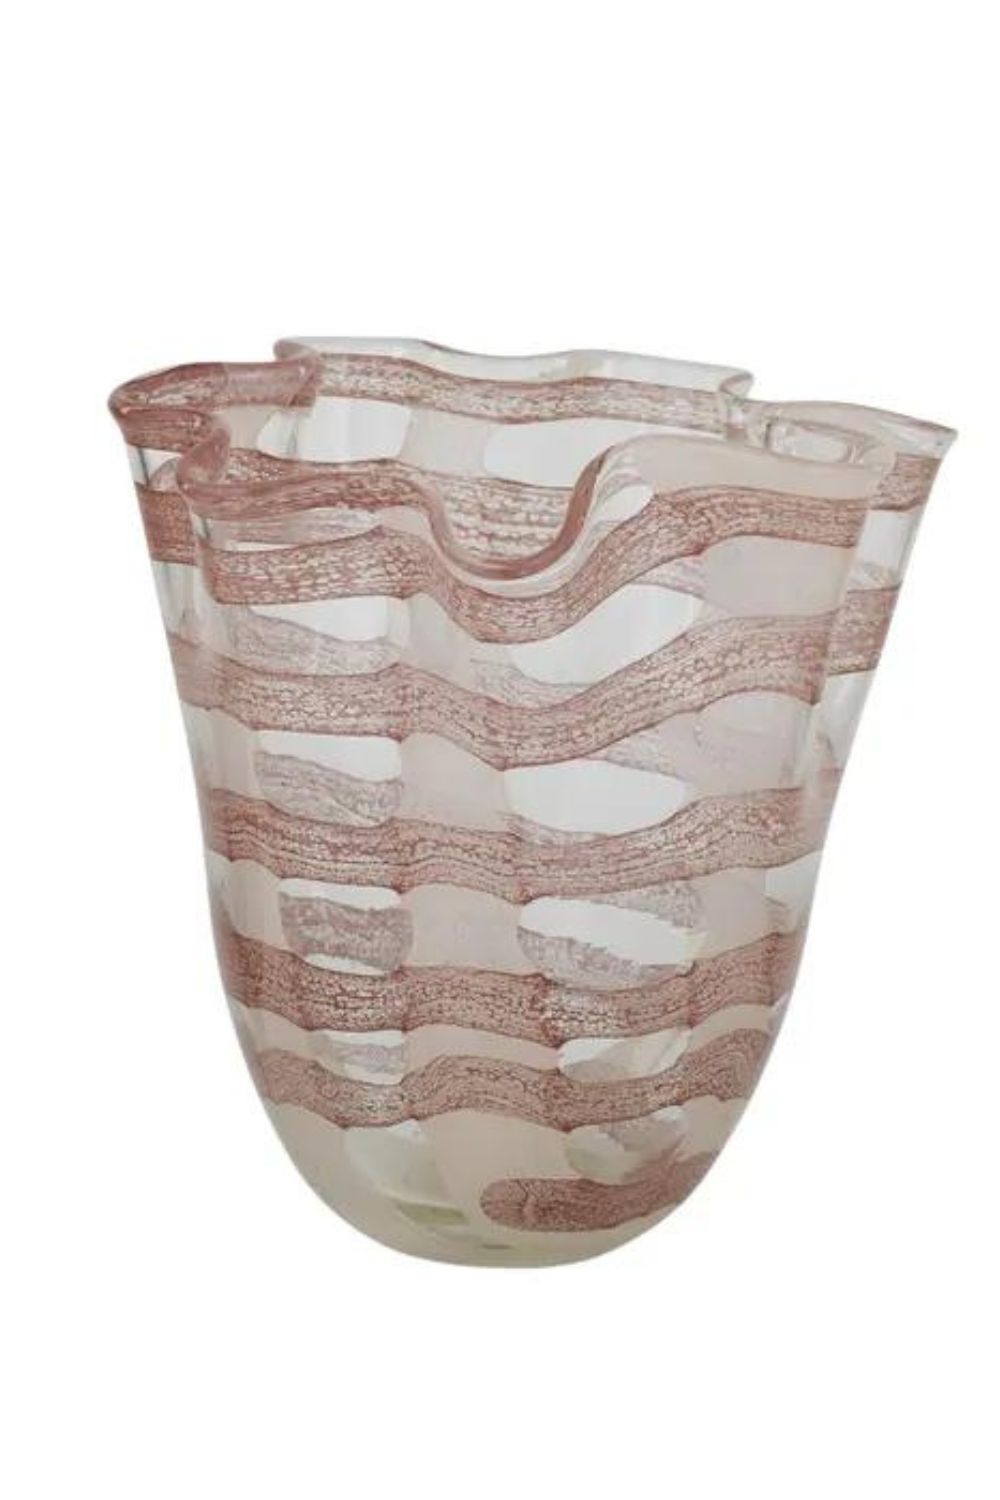 WYONA GLASS VASE SMALL- NUDE/CLARET